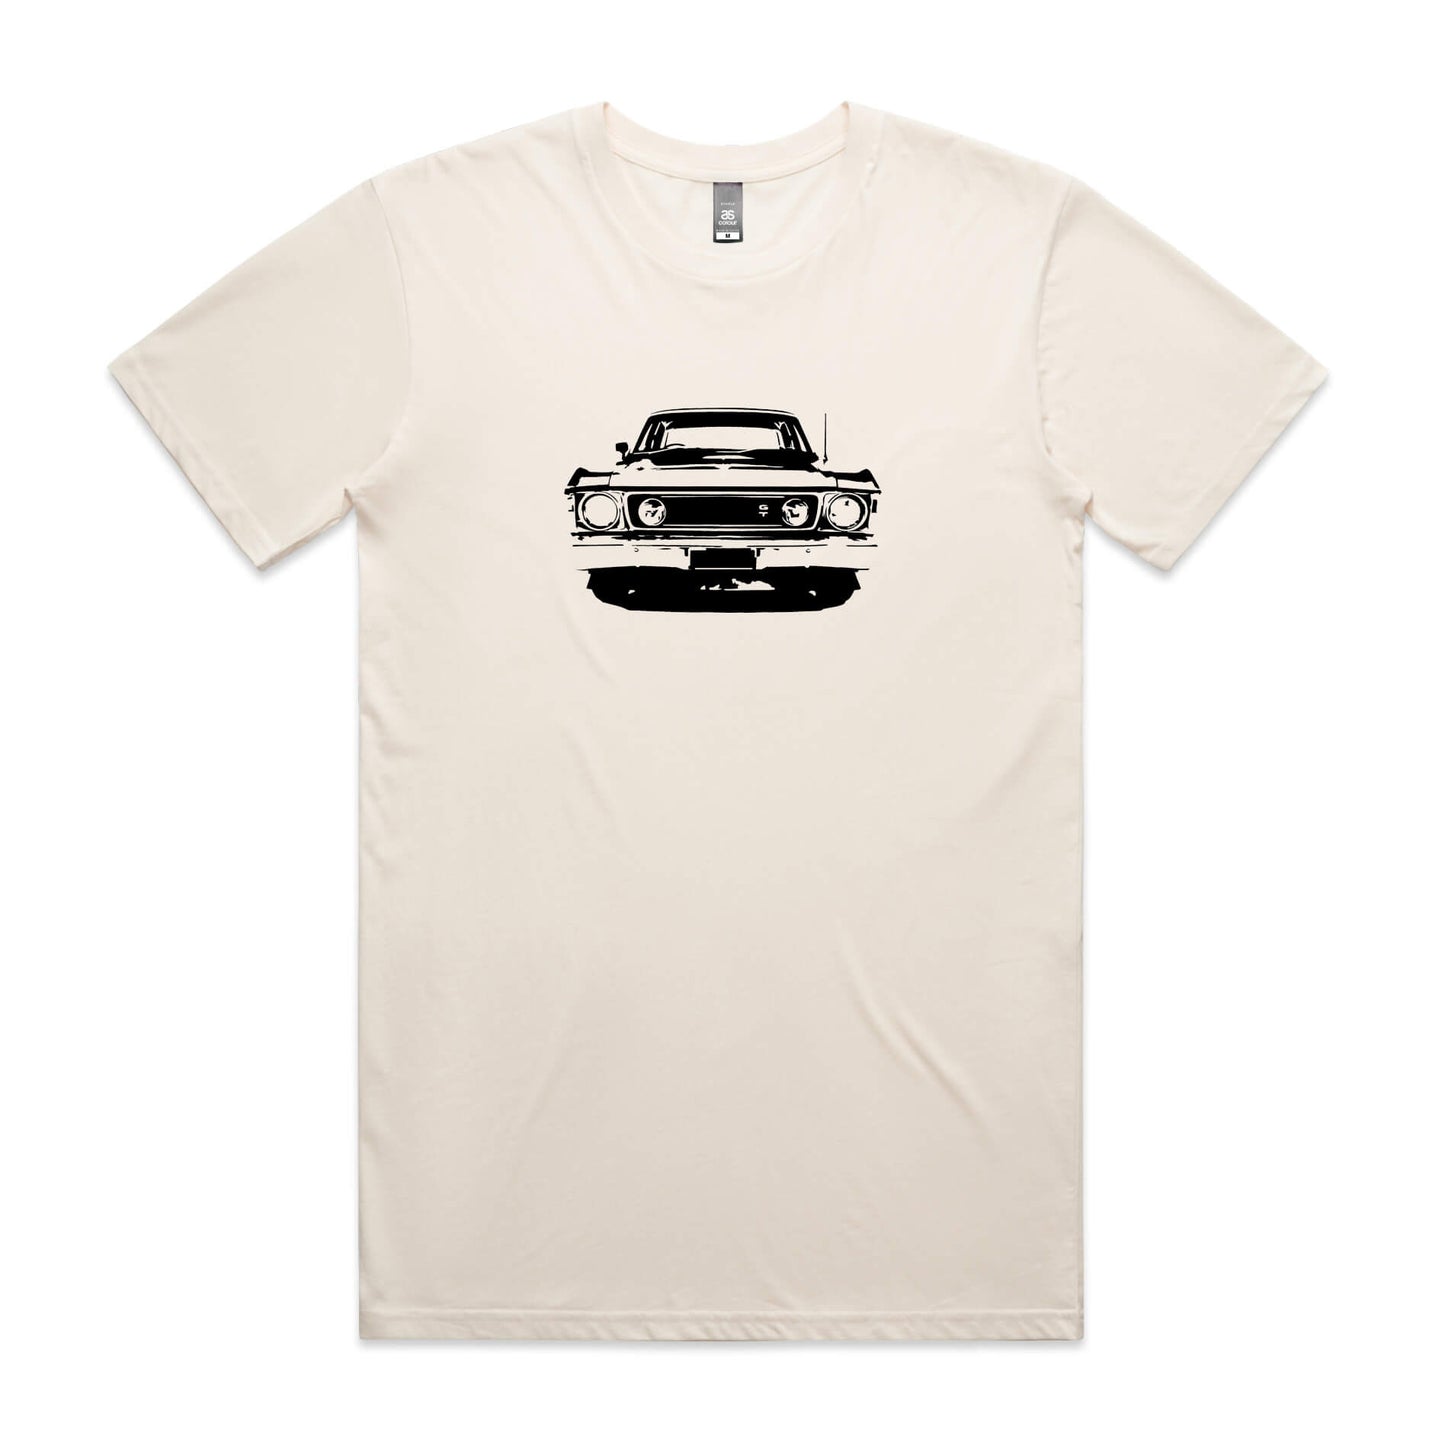 Ford XW Falcon t-shirt in beige with black GT car graphic